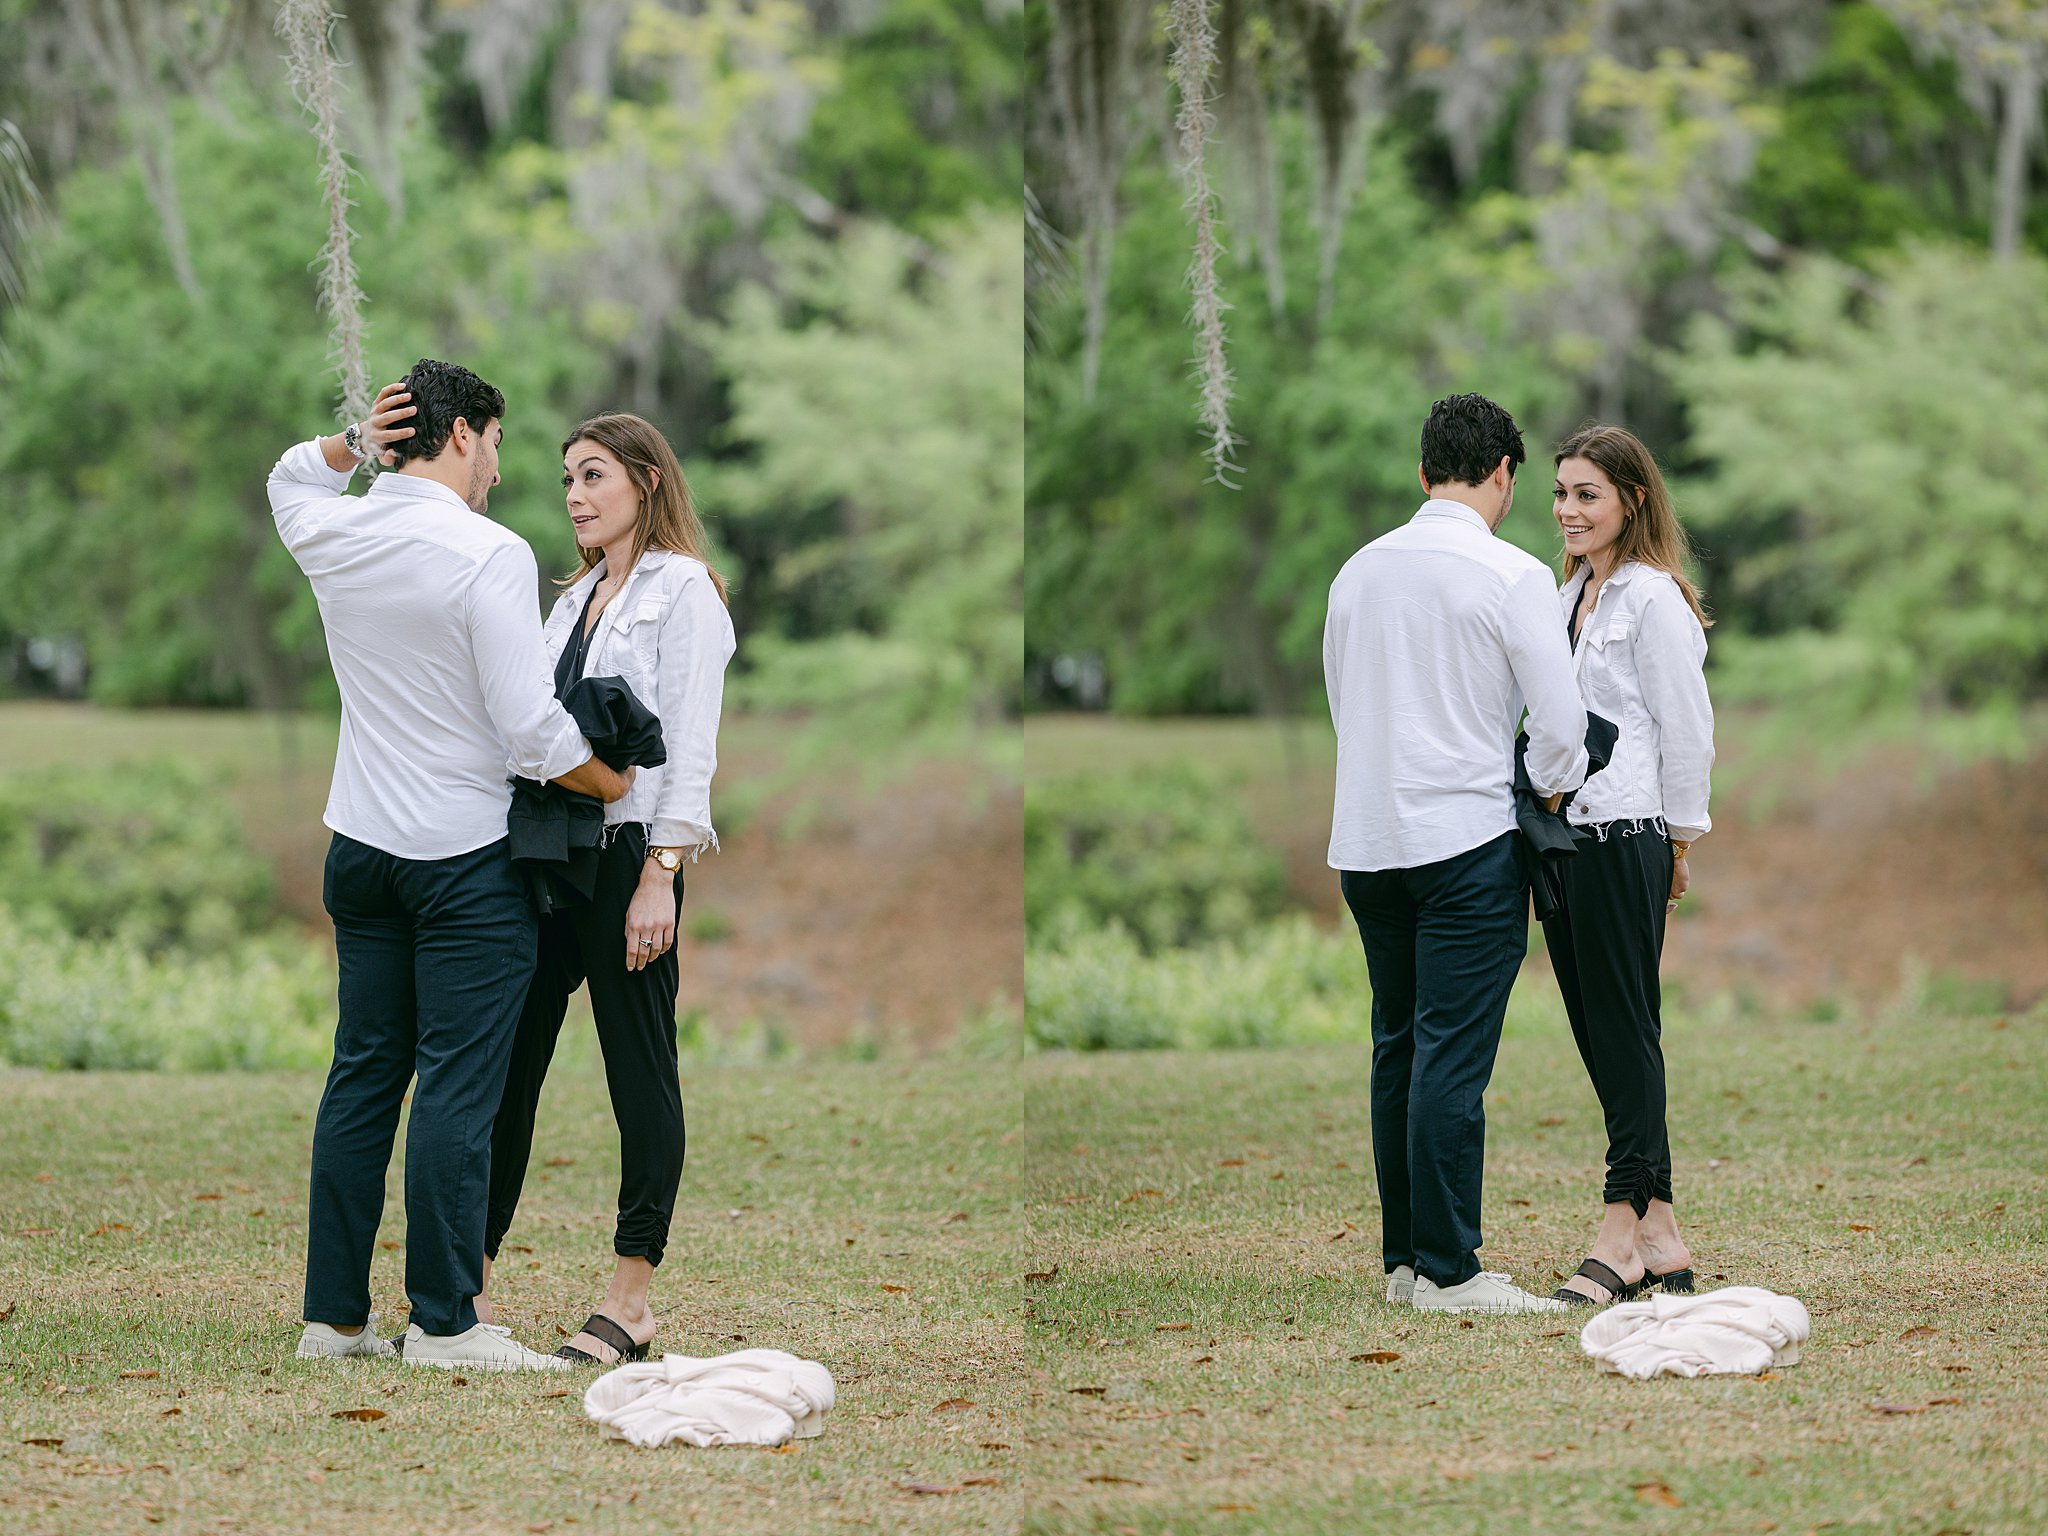 Katherine_Ives_Photography_Surprise_Proposal_Montage_Palmetto_Bluff__Session_72588.JPG